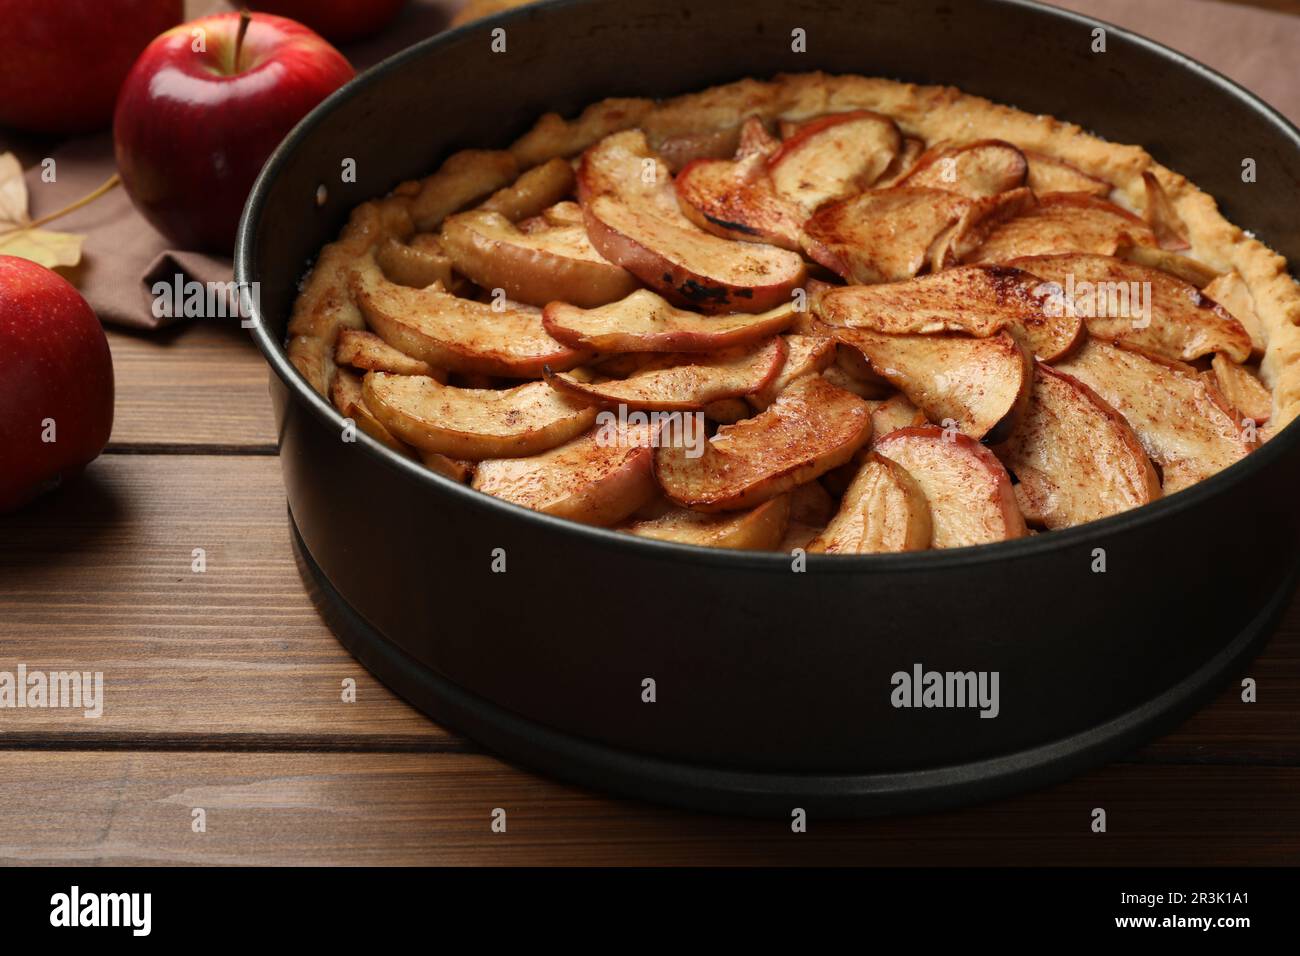 Delicious apple pie and fresh fruits on wooden table, closeup Stock Photo